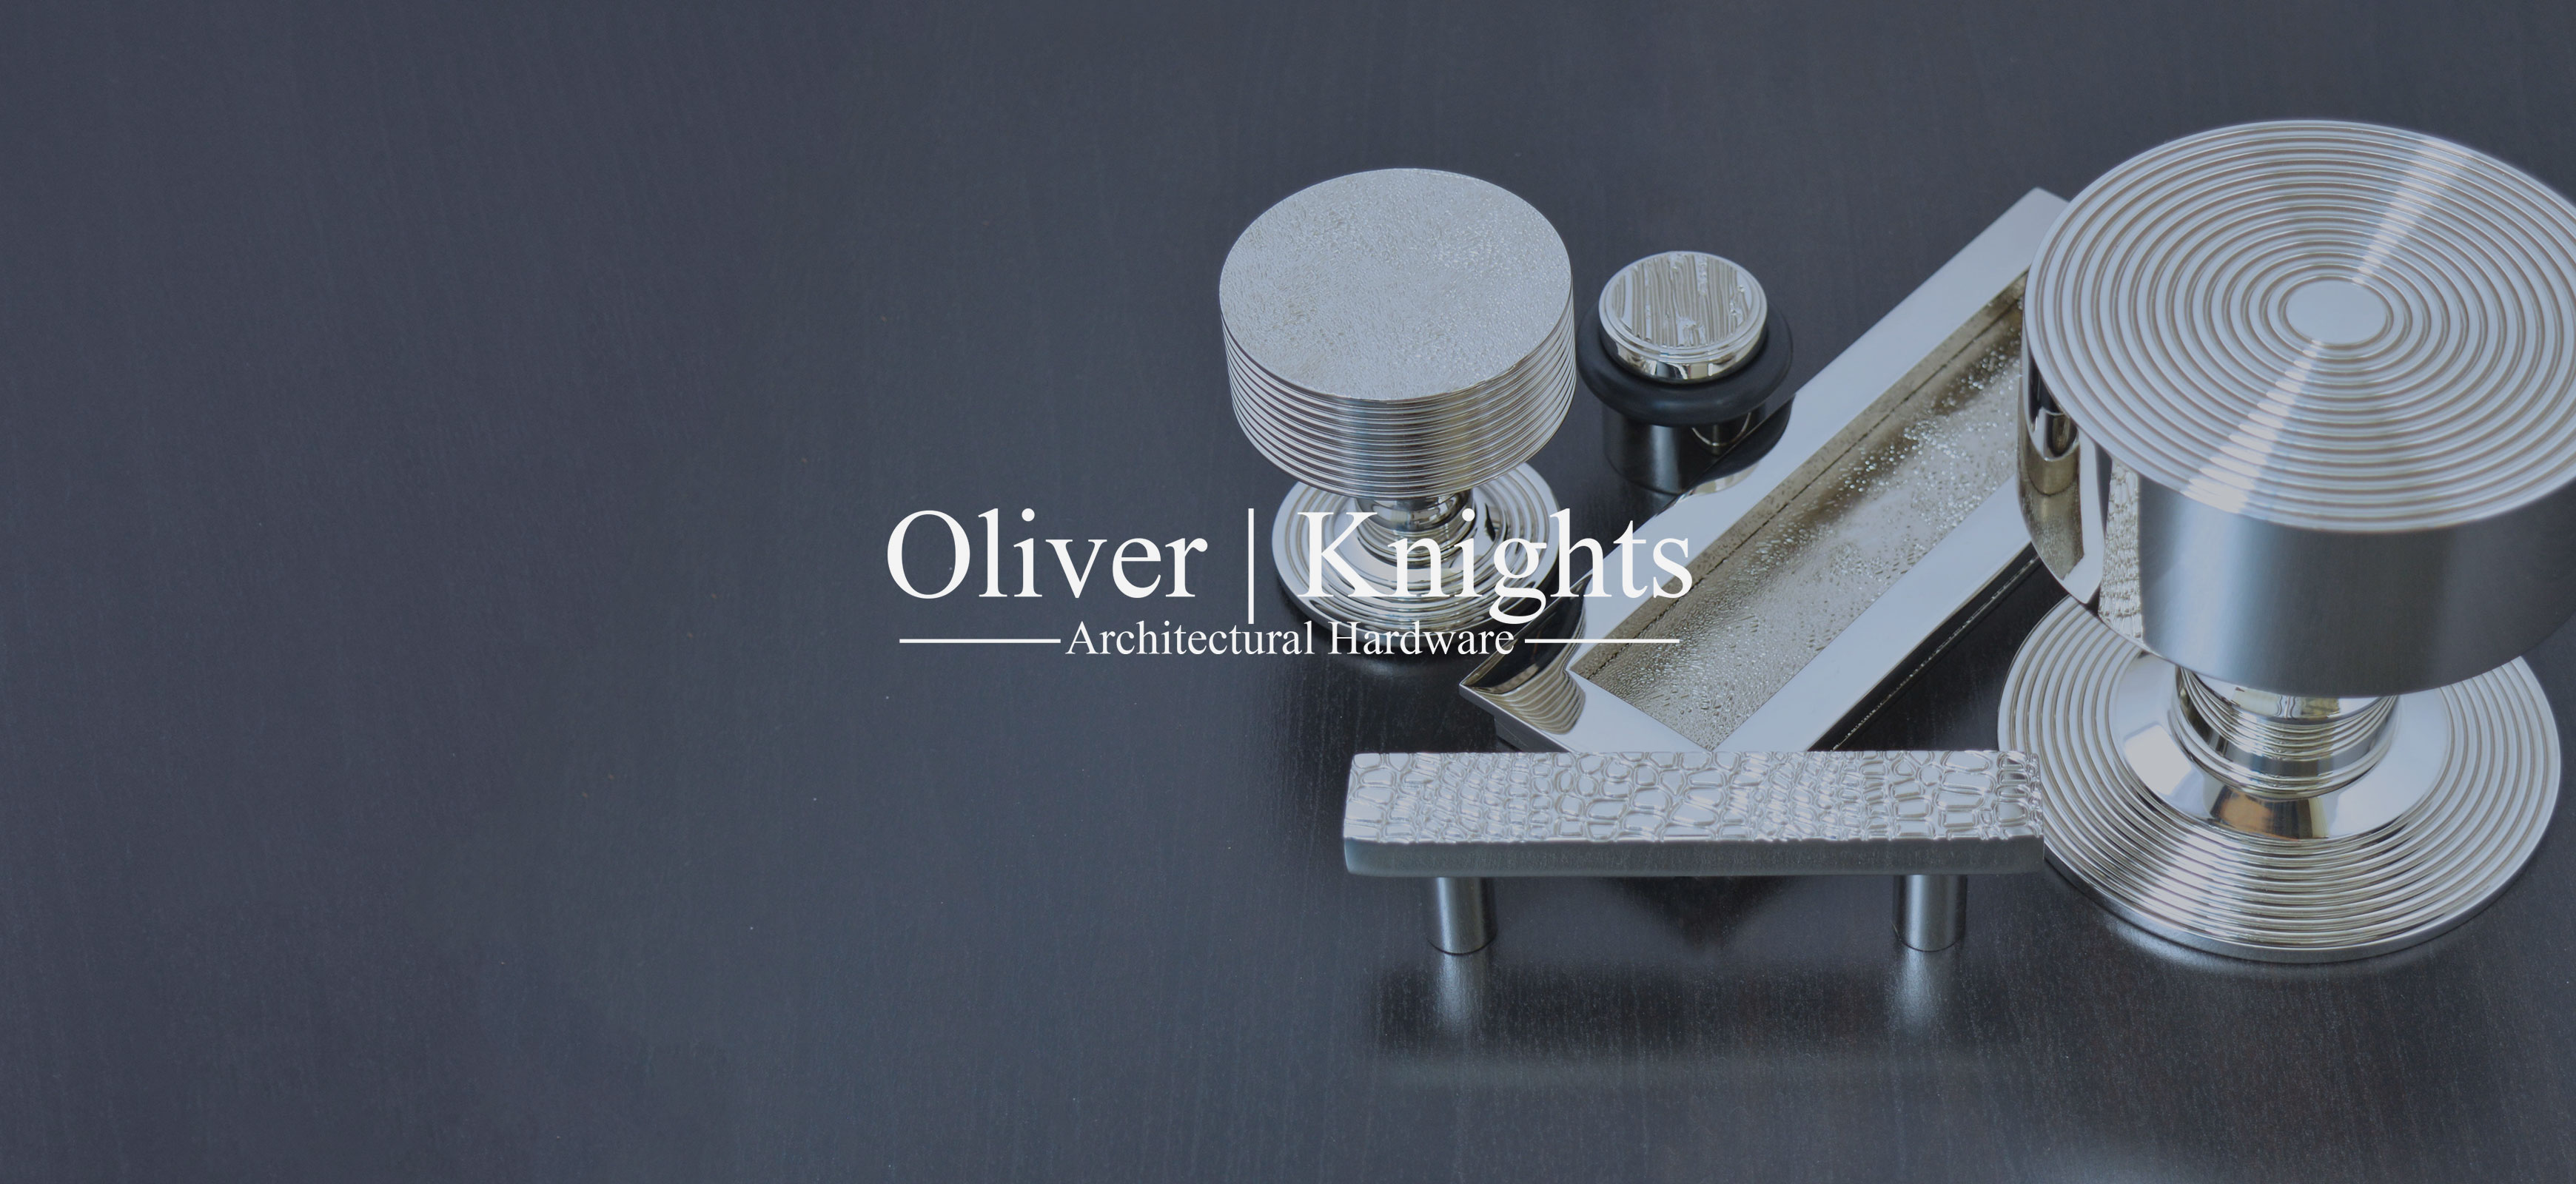 Oliver Knights